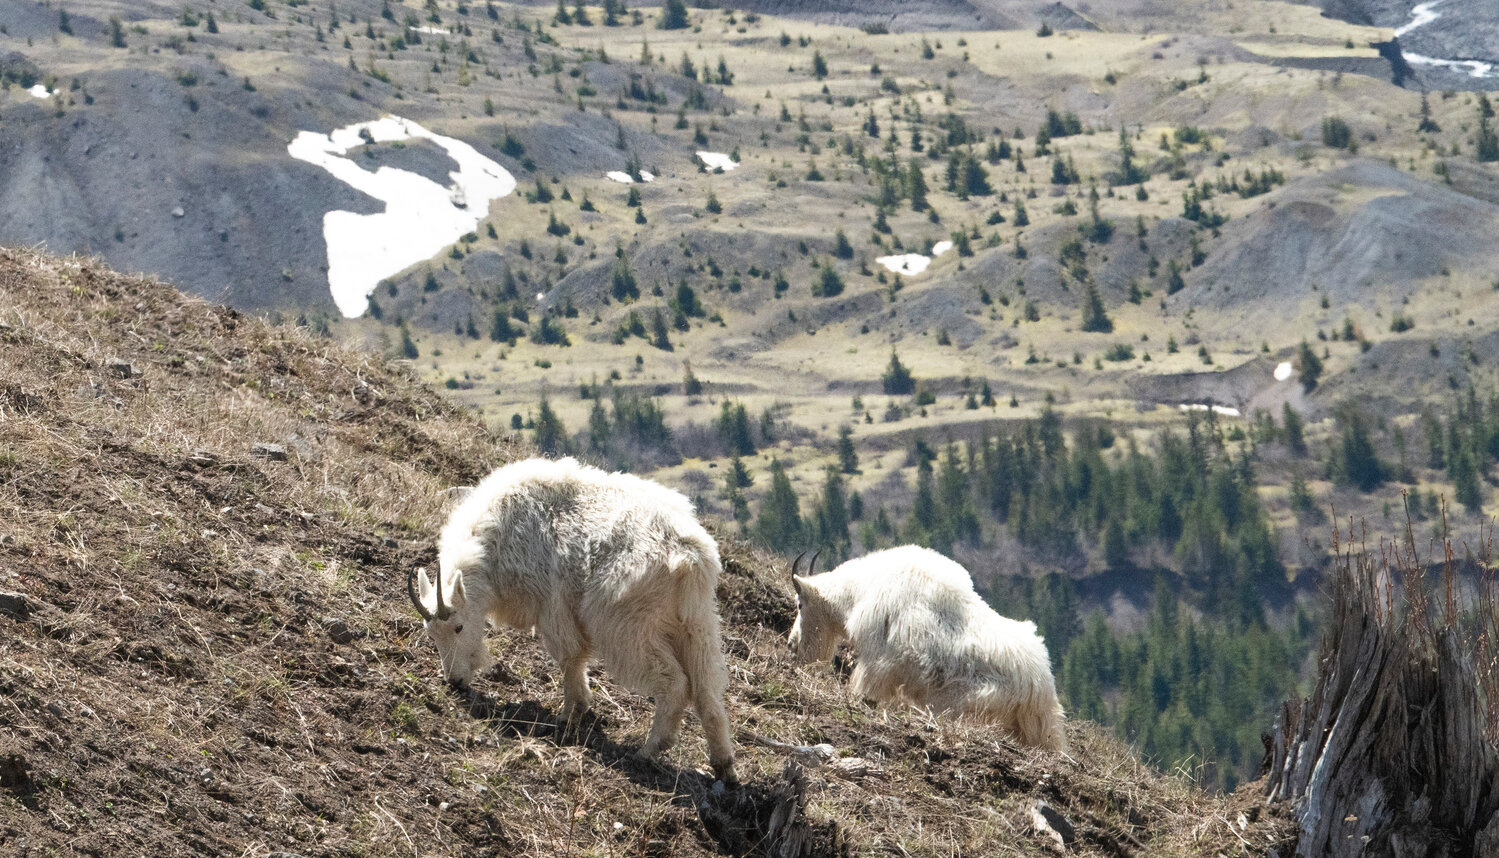 Two adult mountain goats graze near Mount St. Helens on Thursday, May 11.